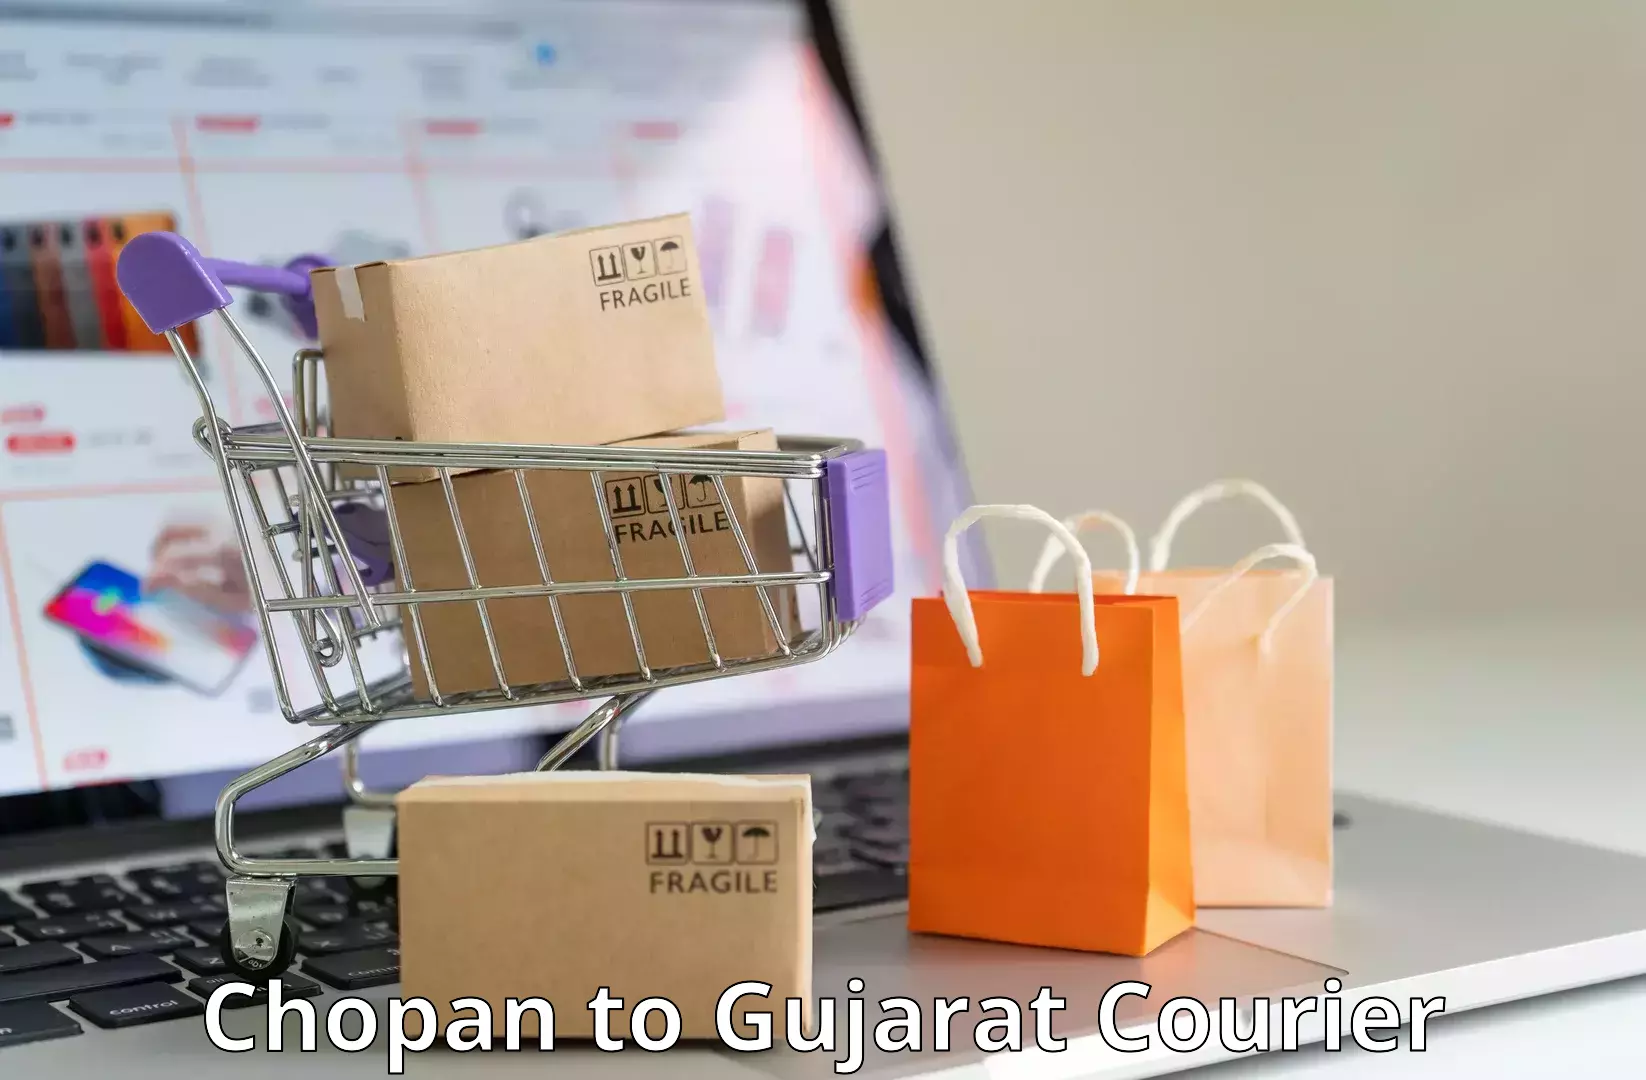 Multi-service courier options Chopan to Gujarat